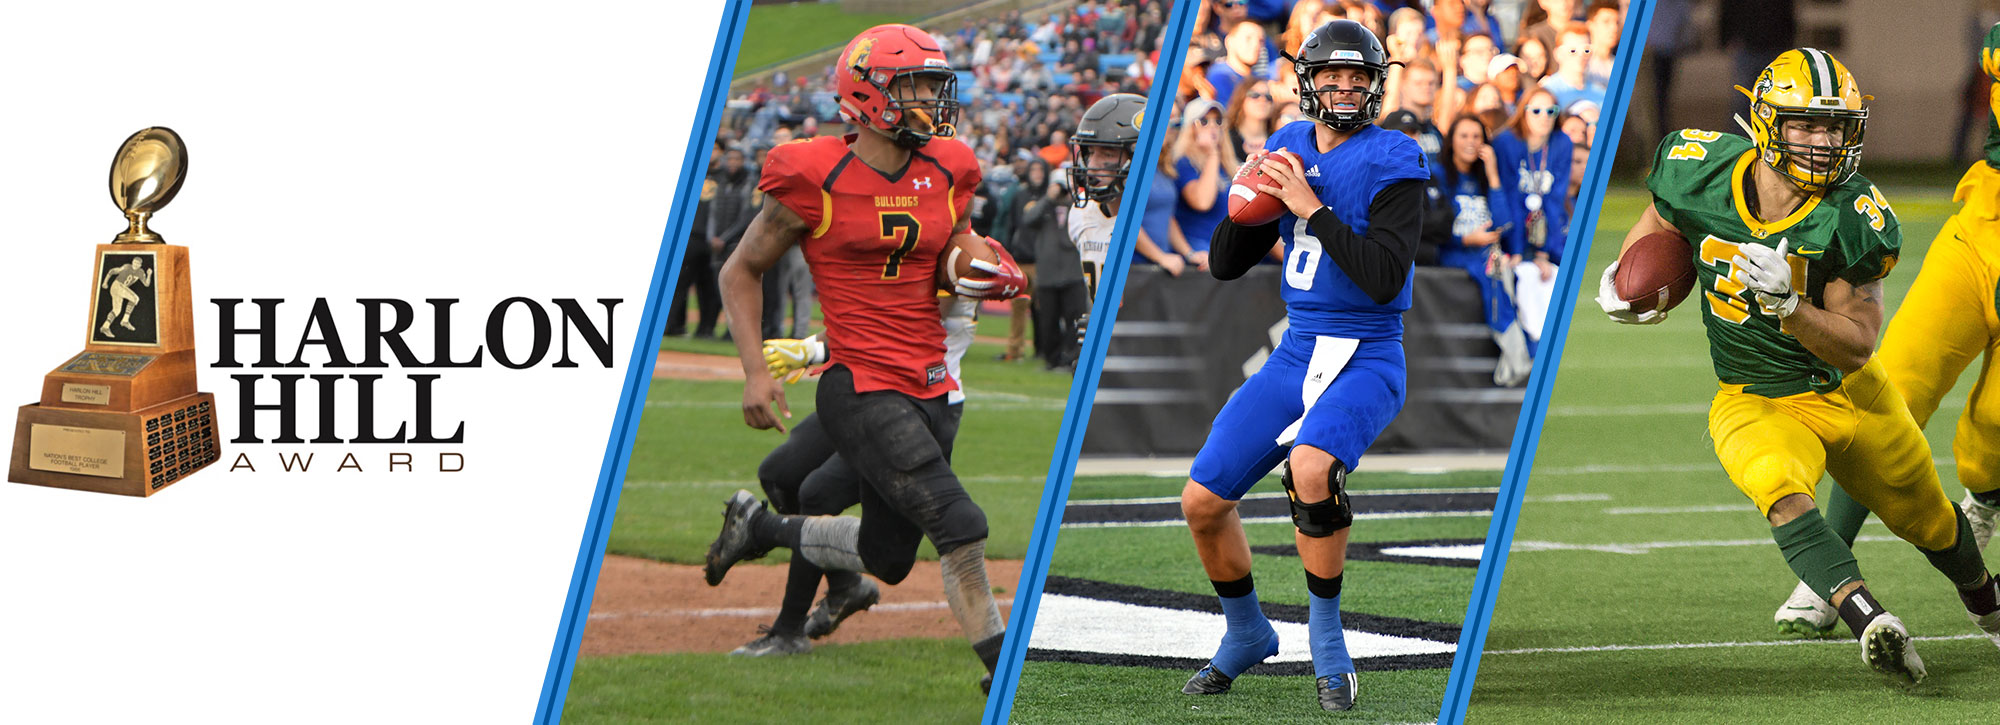 Three #GLIACFB Standouts Nominated for 2018 Harlon Hill Trophy